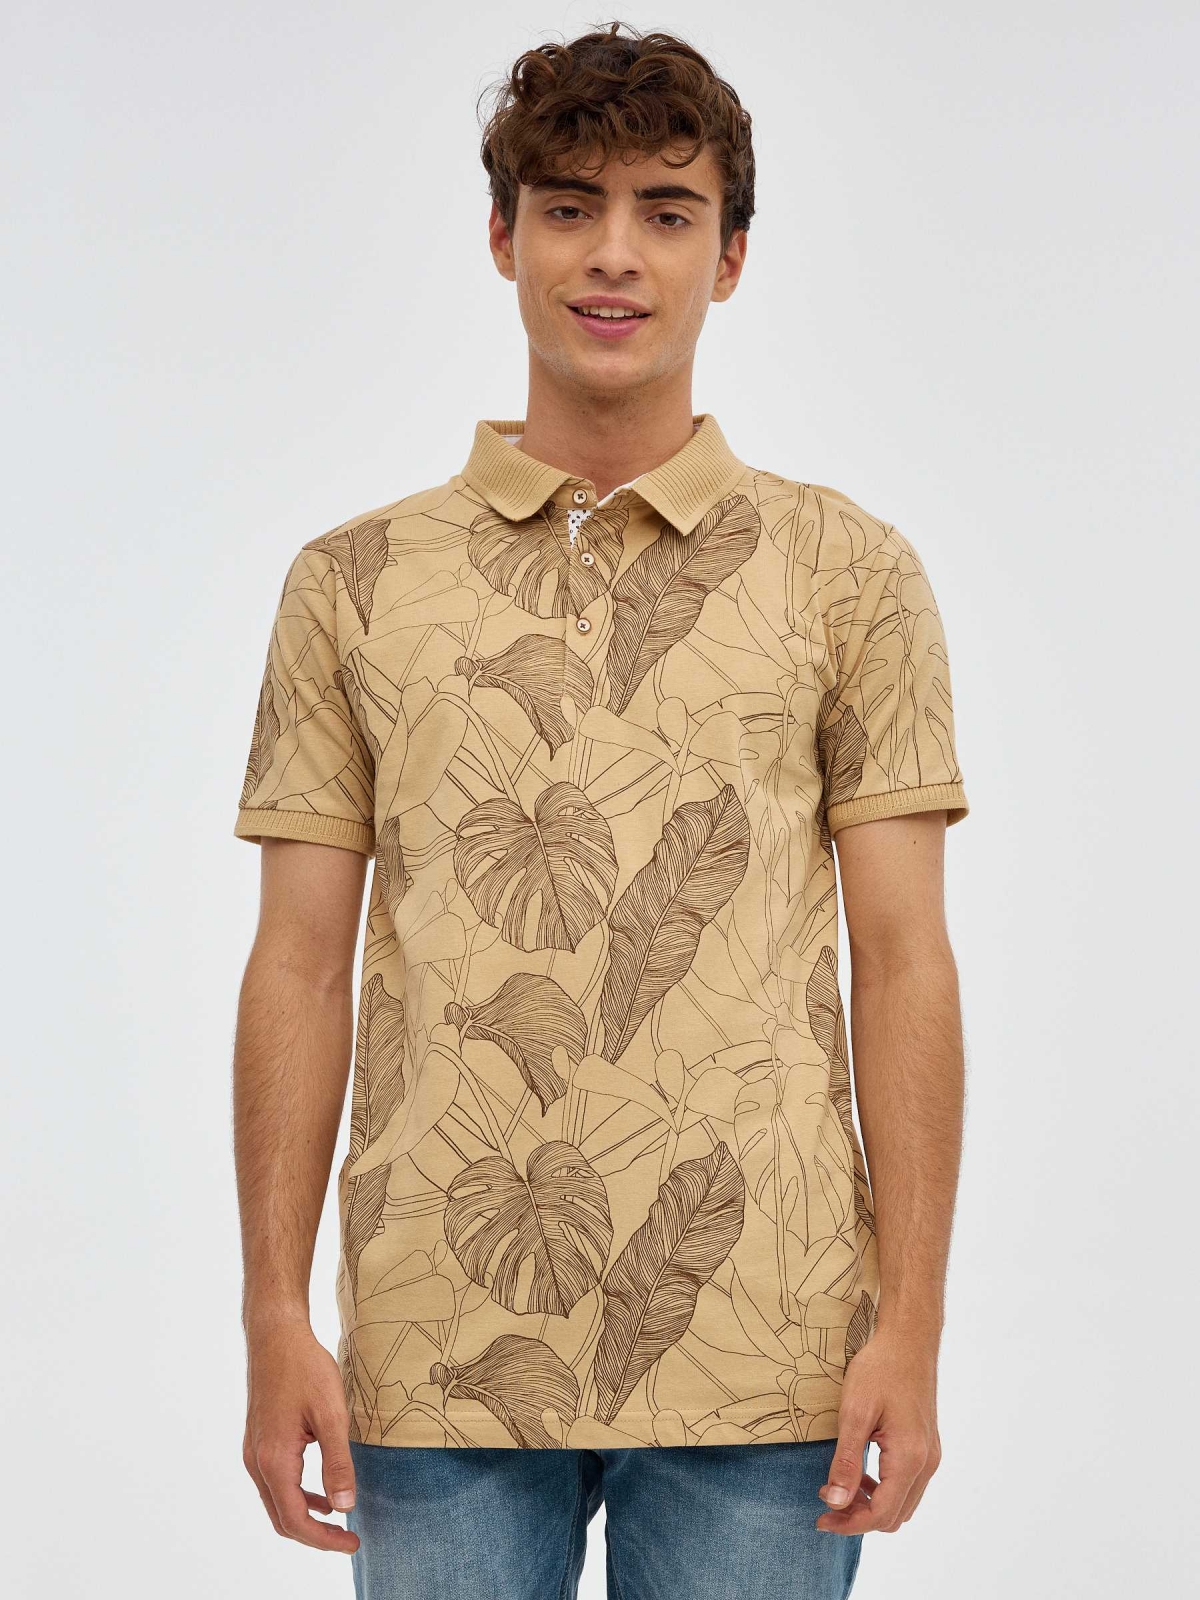 Floral print polo shirt earth brown middle front view